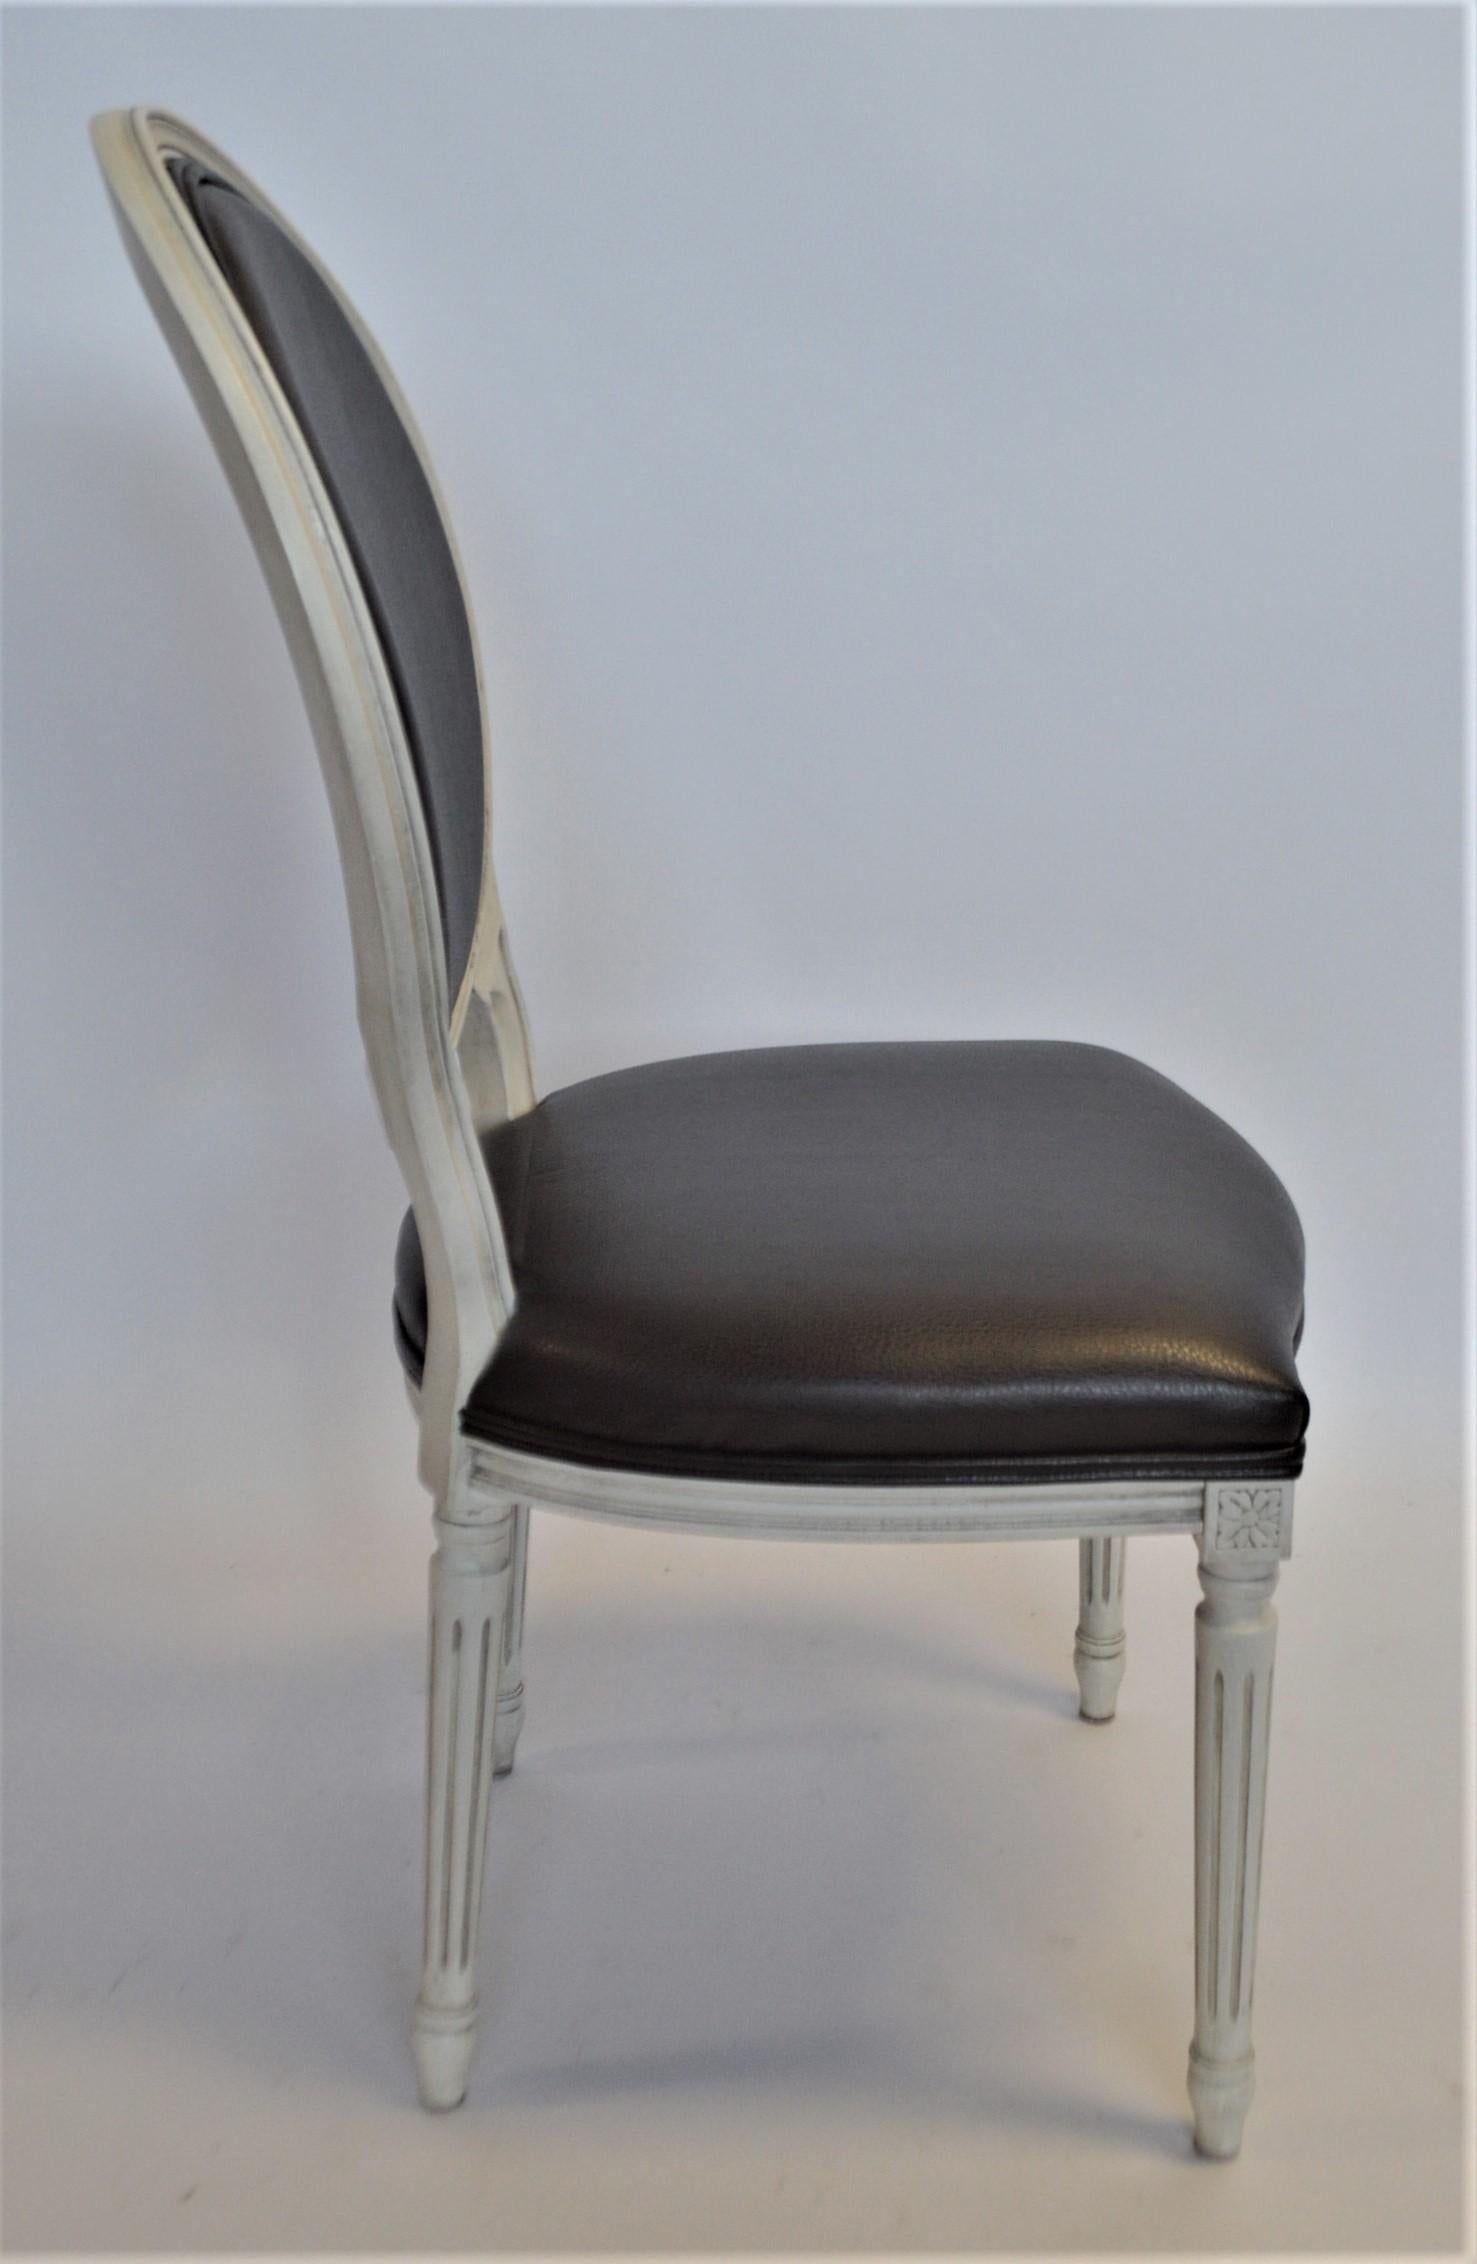 This Louis XVI style oval back dining chair is showing here in a white patinated frame and upholstered in a black faux leather. The frame is made in Italy of solid beech wood. The price includes a custom paint finish or wood stain and upholstery